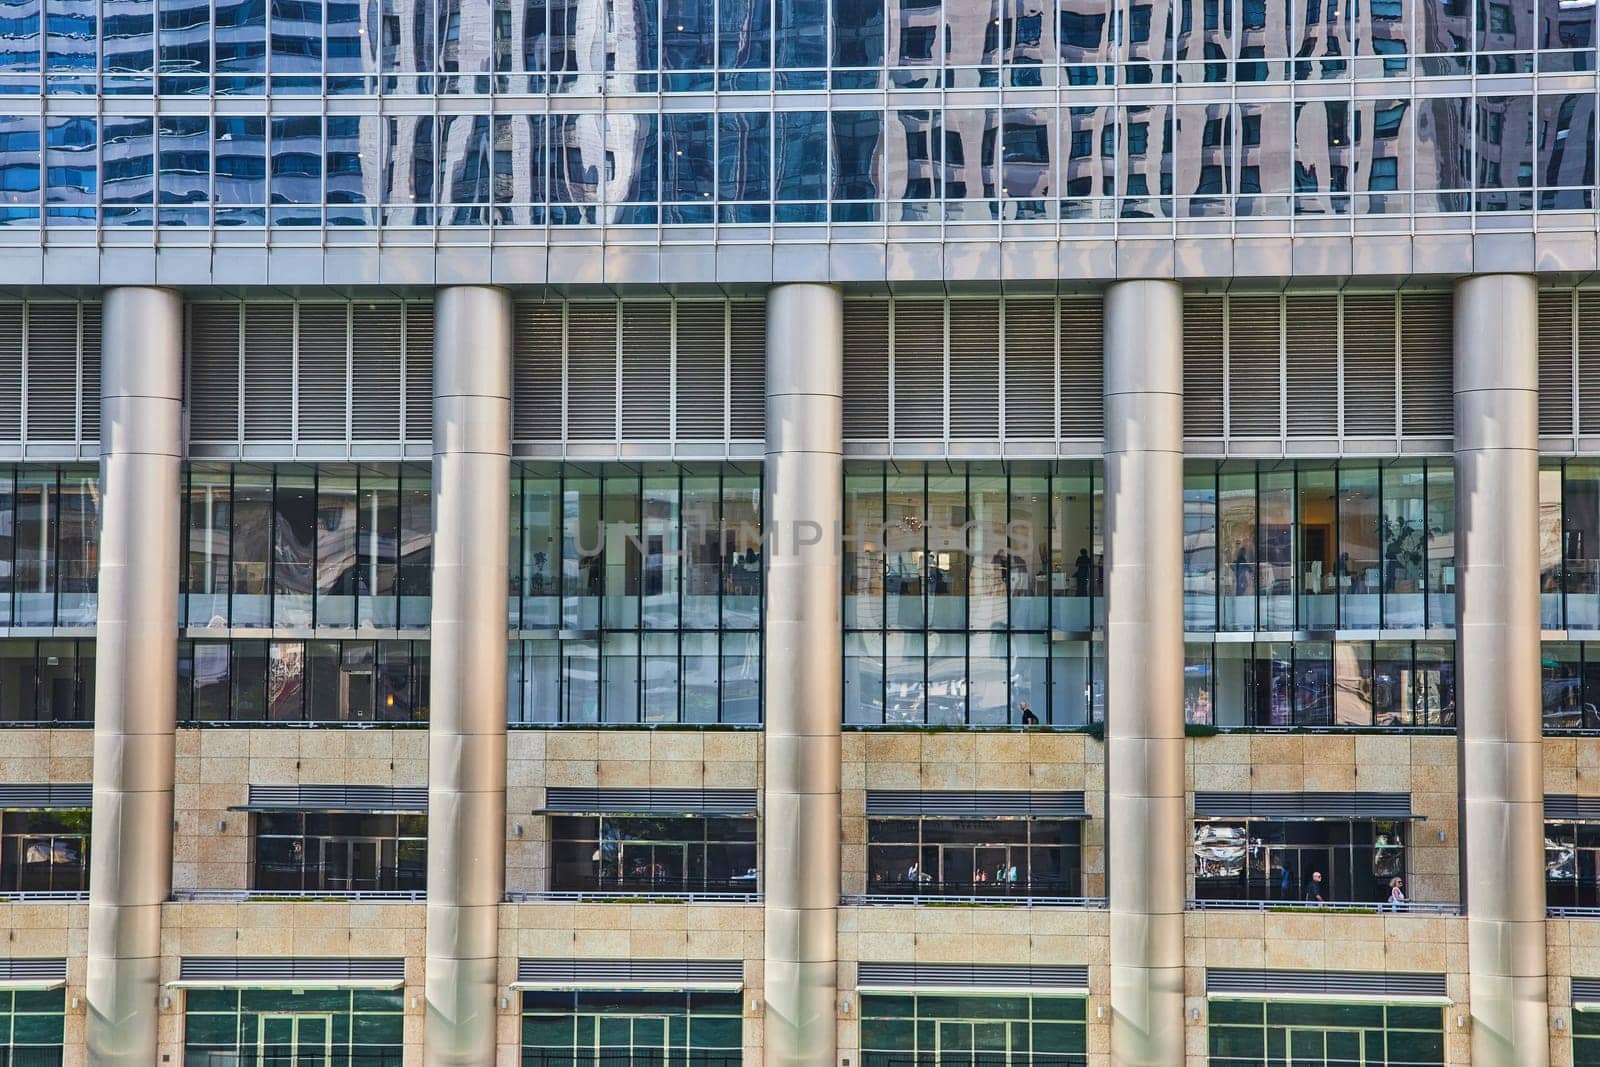 Chrome pillars with reflective windows and bars between in architecture view of Chicago, IL building by njproductions